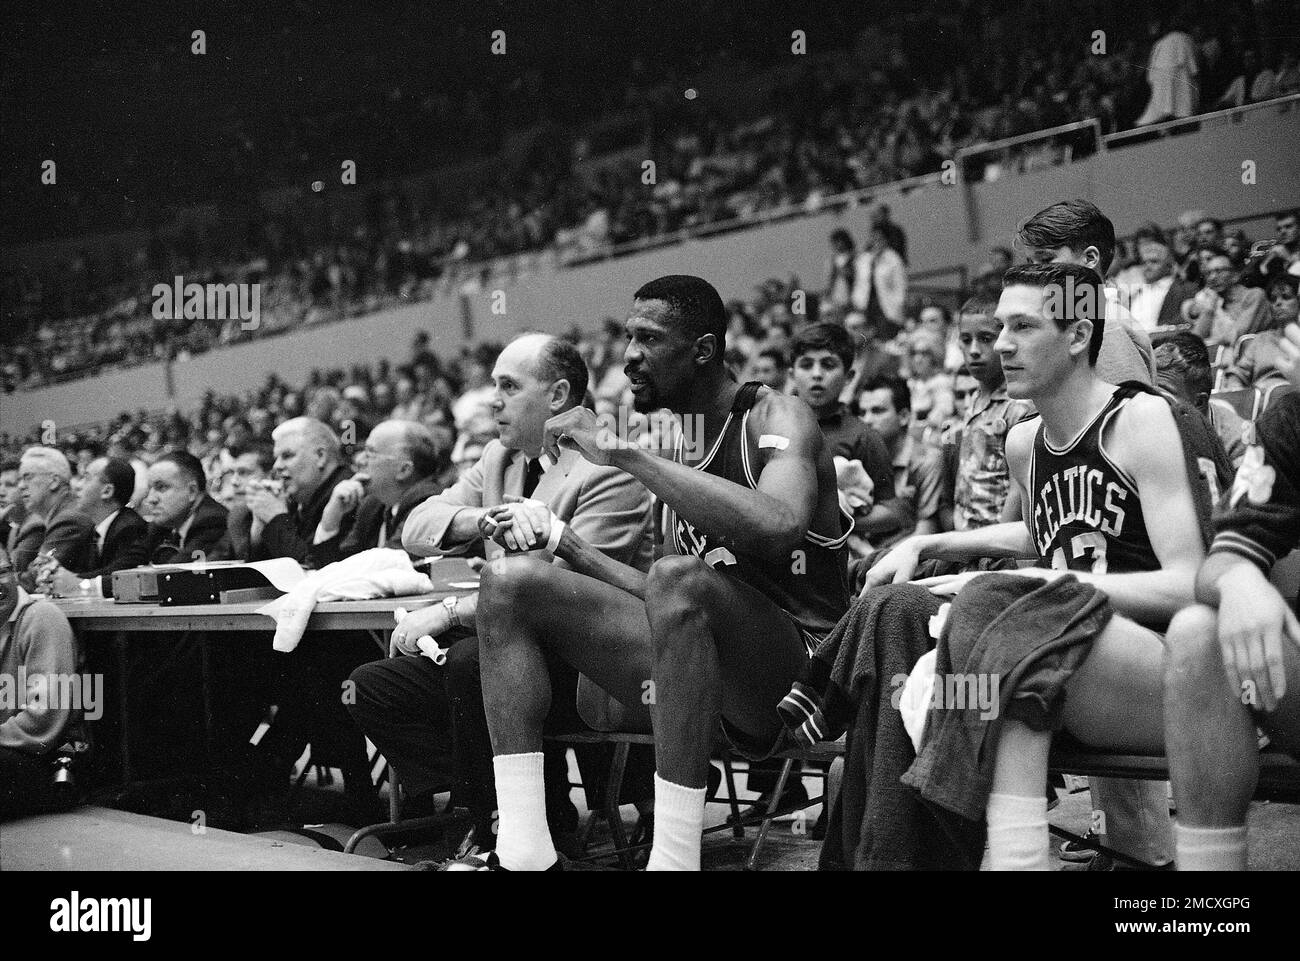 https://c8.alamy.com/comp/2MCXGPG/file-boston-coach-red-auerbach-and-bill-russell-watch-action-as-they-shake-hands-on-the-bench-in-the-final-seconds-of-the-celtics-112-99-win-over-the-lakers-in-an-nba-playoff-game-at-los-angeles-april-23-1965-russell-had-just-left-the-game-for-the-first-time-with-less-than-a-minute-to-play-ap-photoed-widdis-file-2MCXGPG.jpg